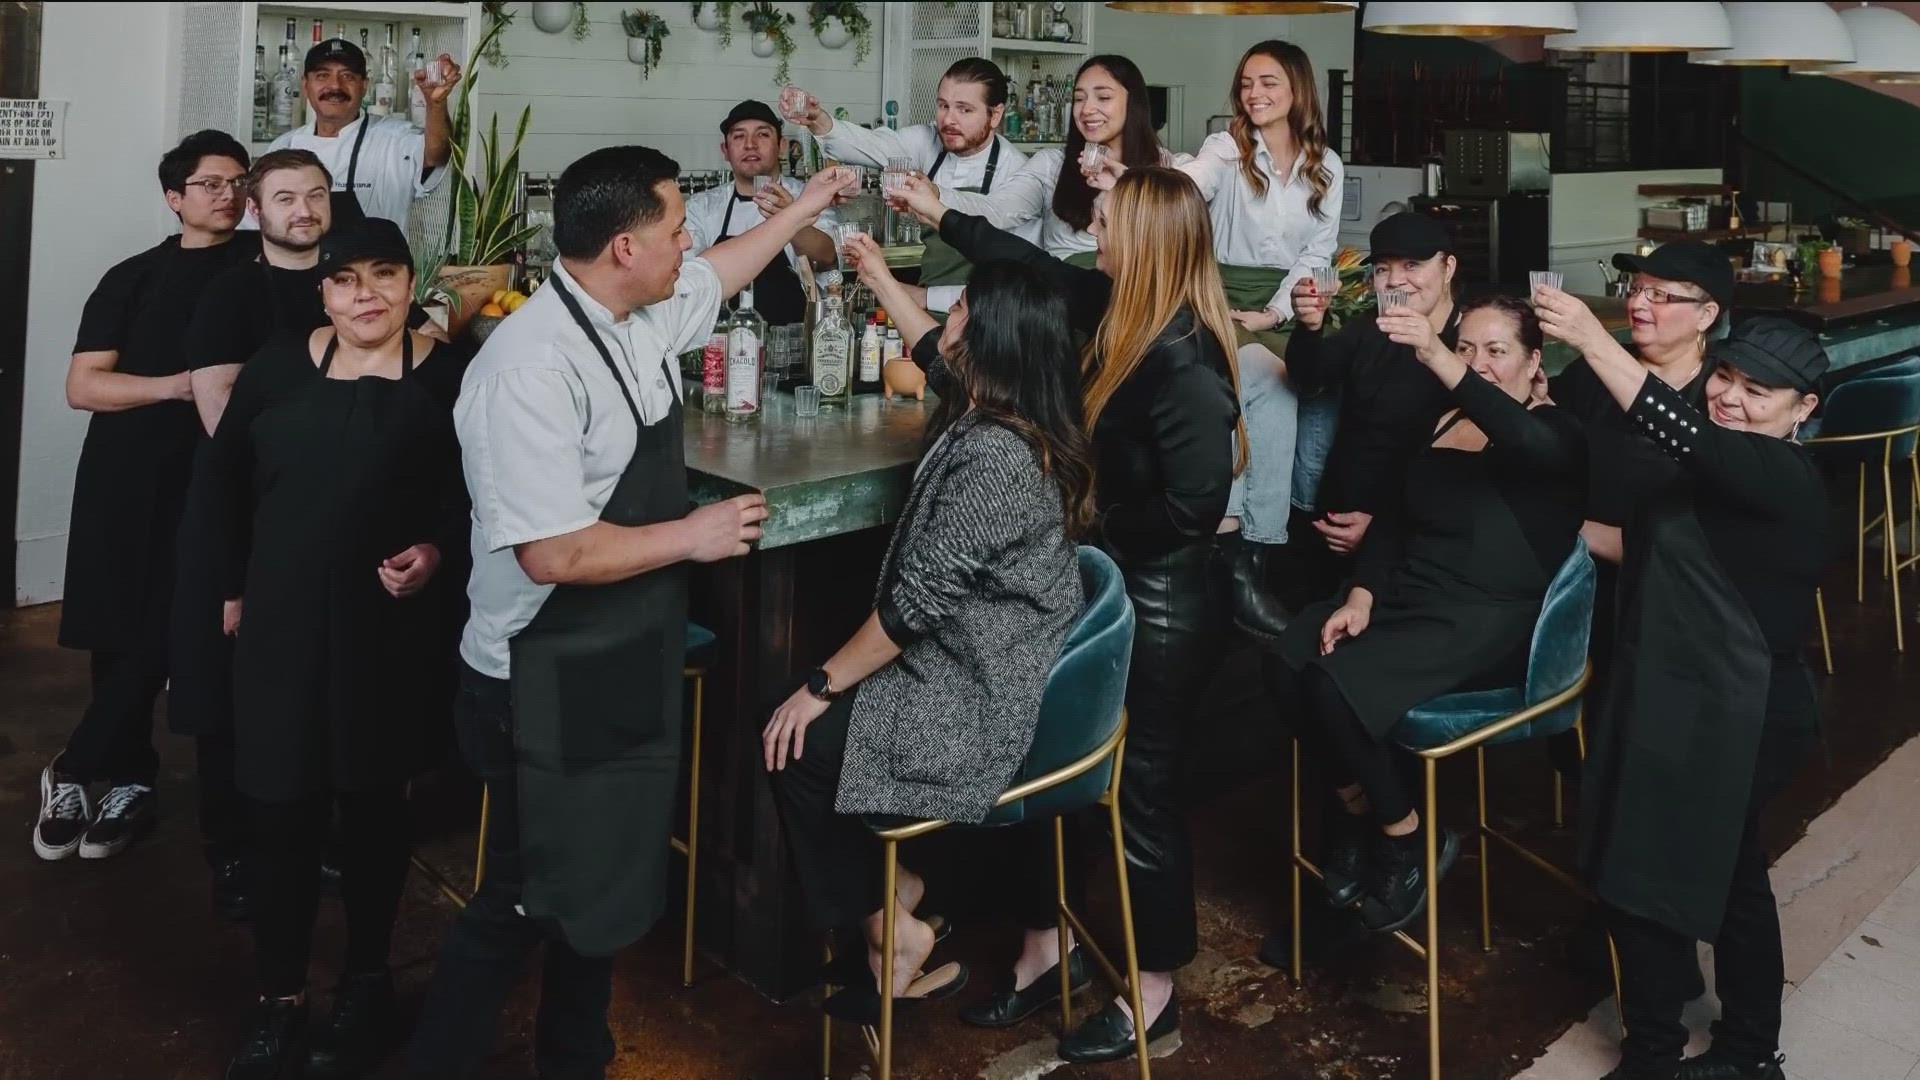 Amano co-owner and chef Salvador Alamilla said "it still feels like it's not real," seeing his restaurant among some of the nation's best in the annual article.